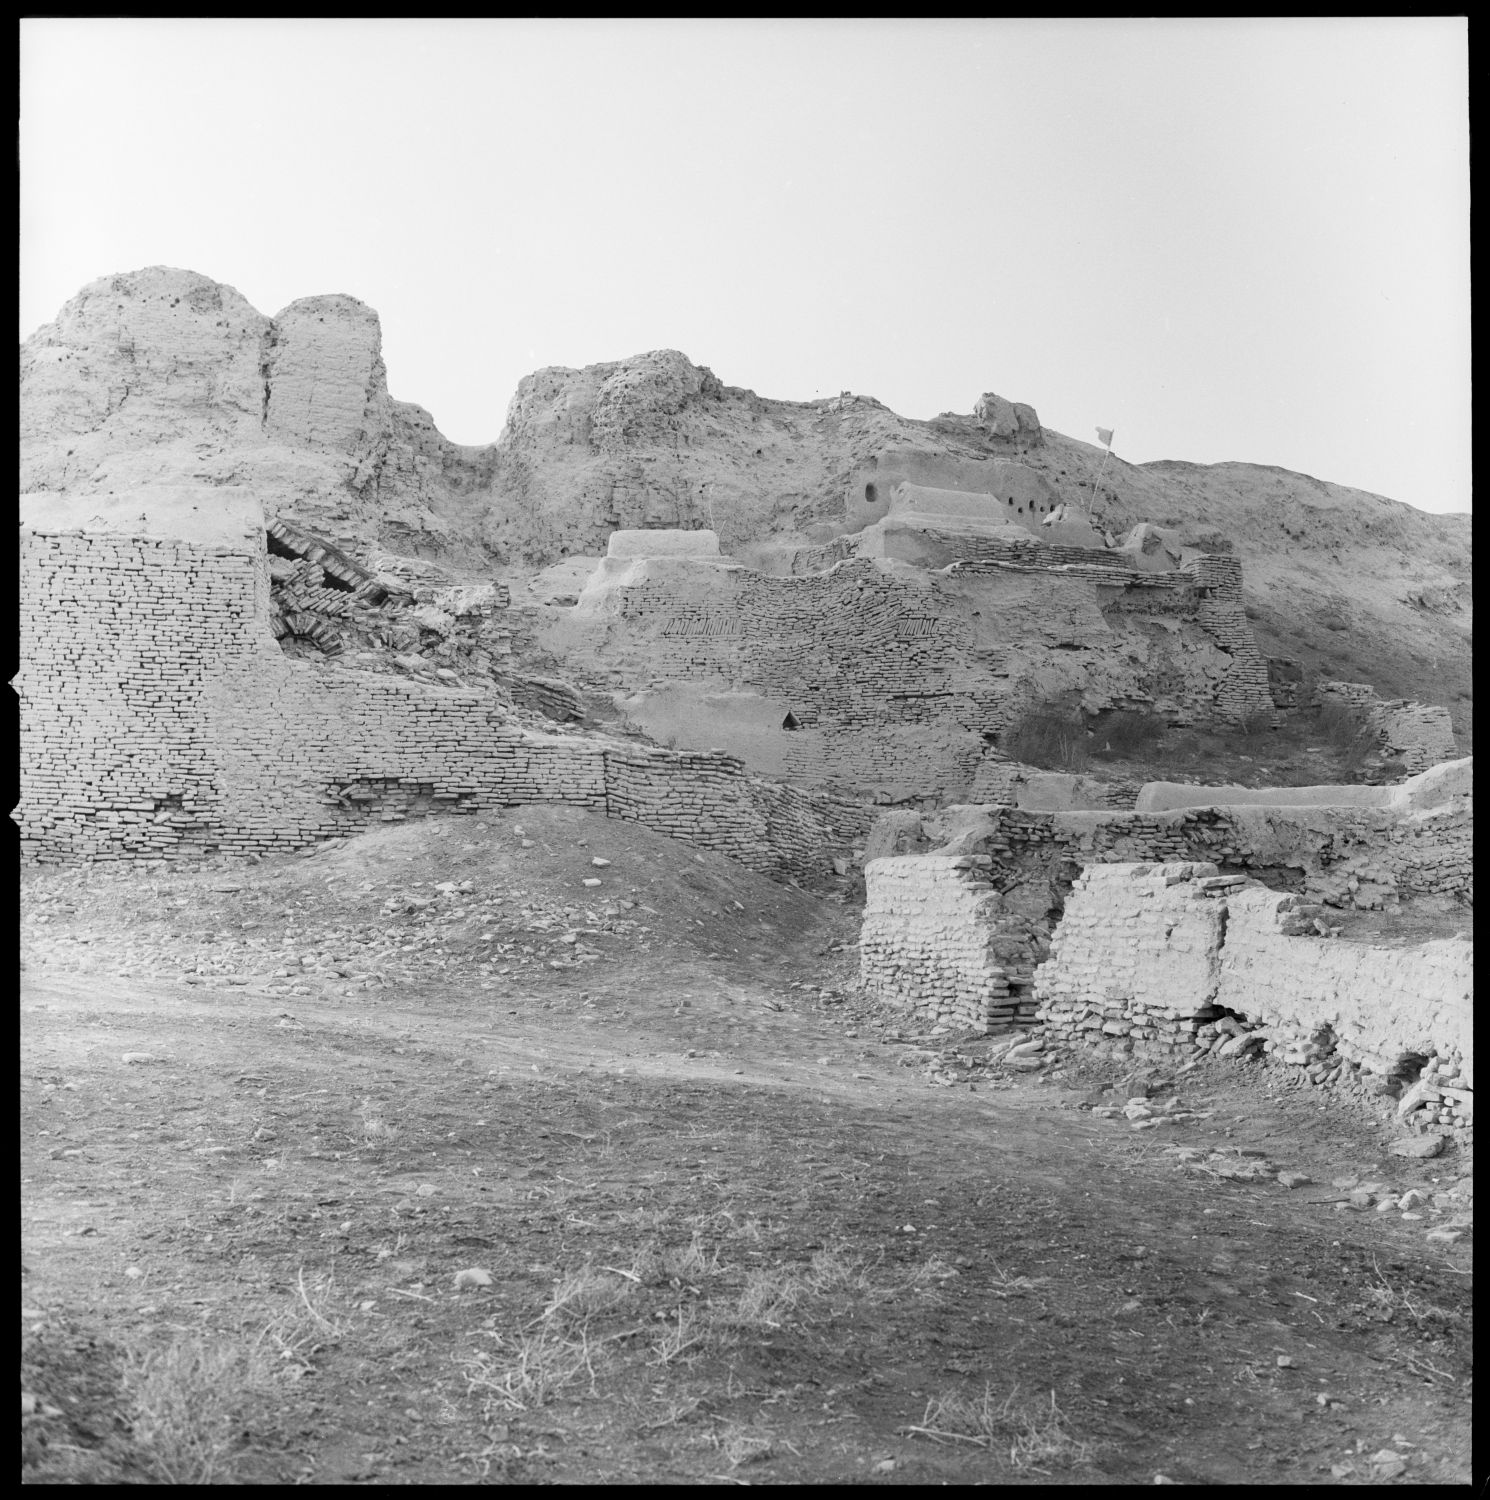 View of details of ruins and ramparts.